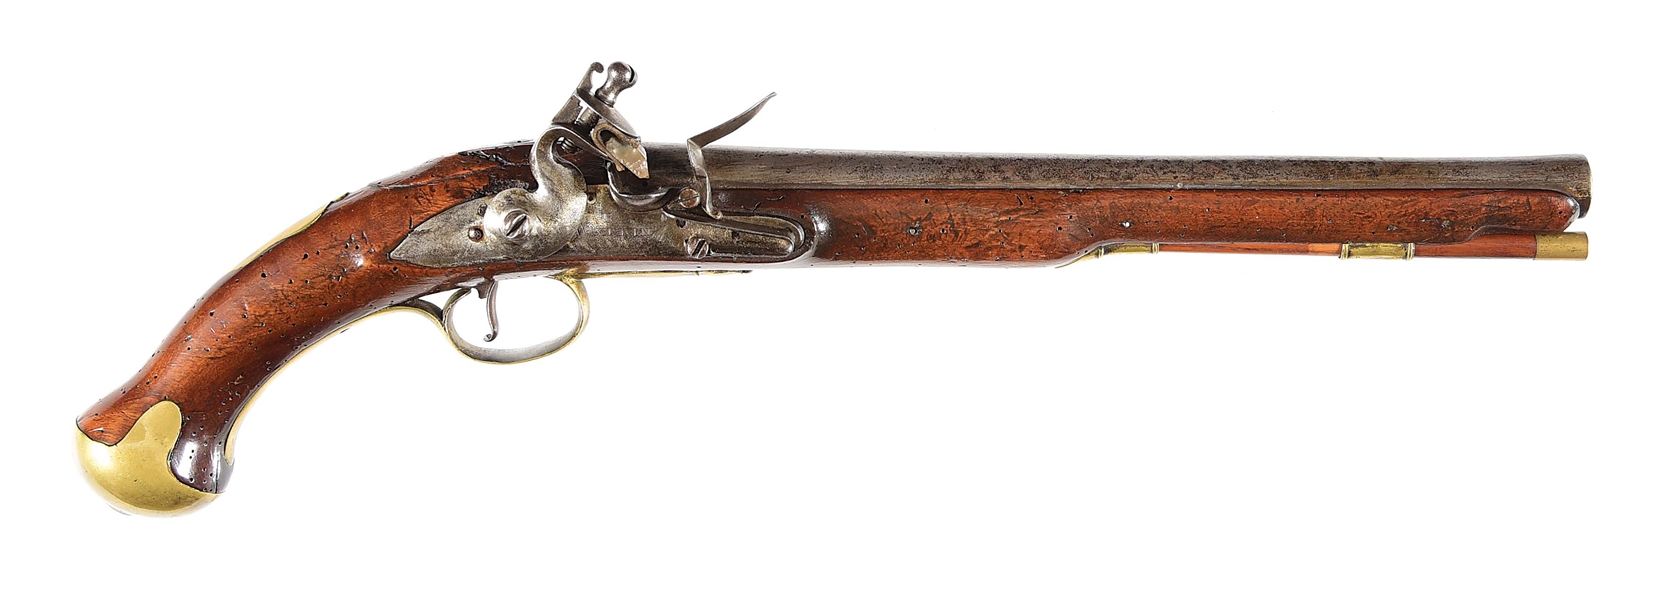 (A) PRIVATE PURCHASED PATTERN 1738 HEAVY DRAGOON PISTOL BY WATKINS.